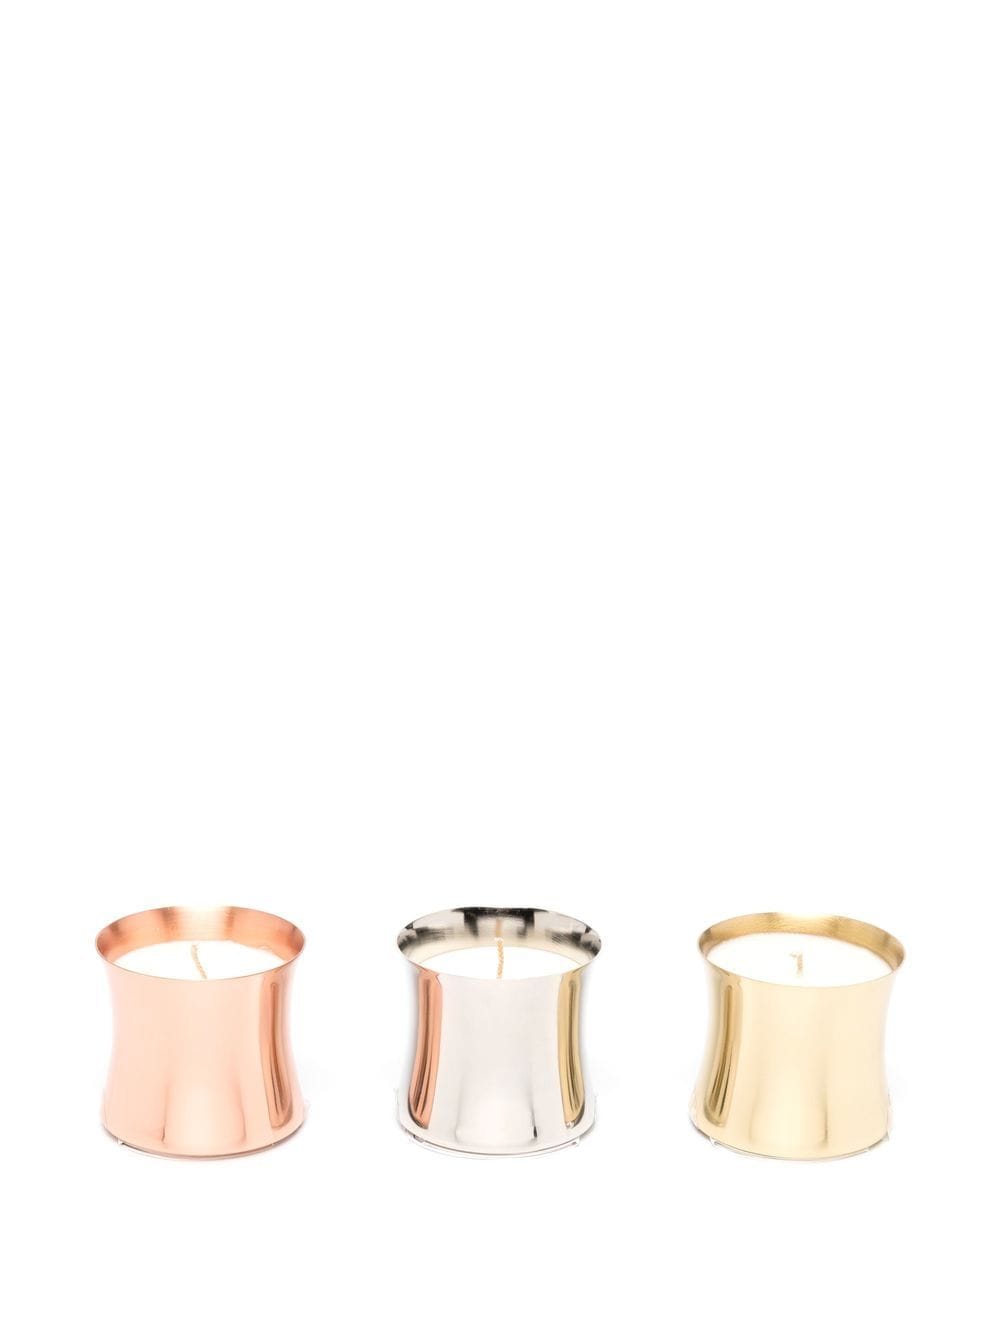 Image 2 of Tom Dixon Eclectic candle gift set